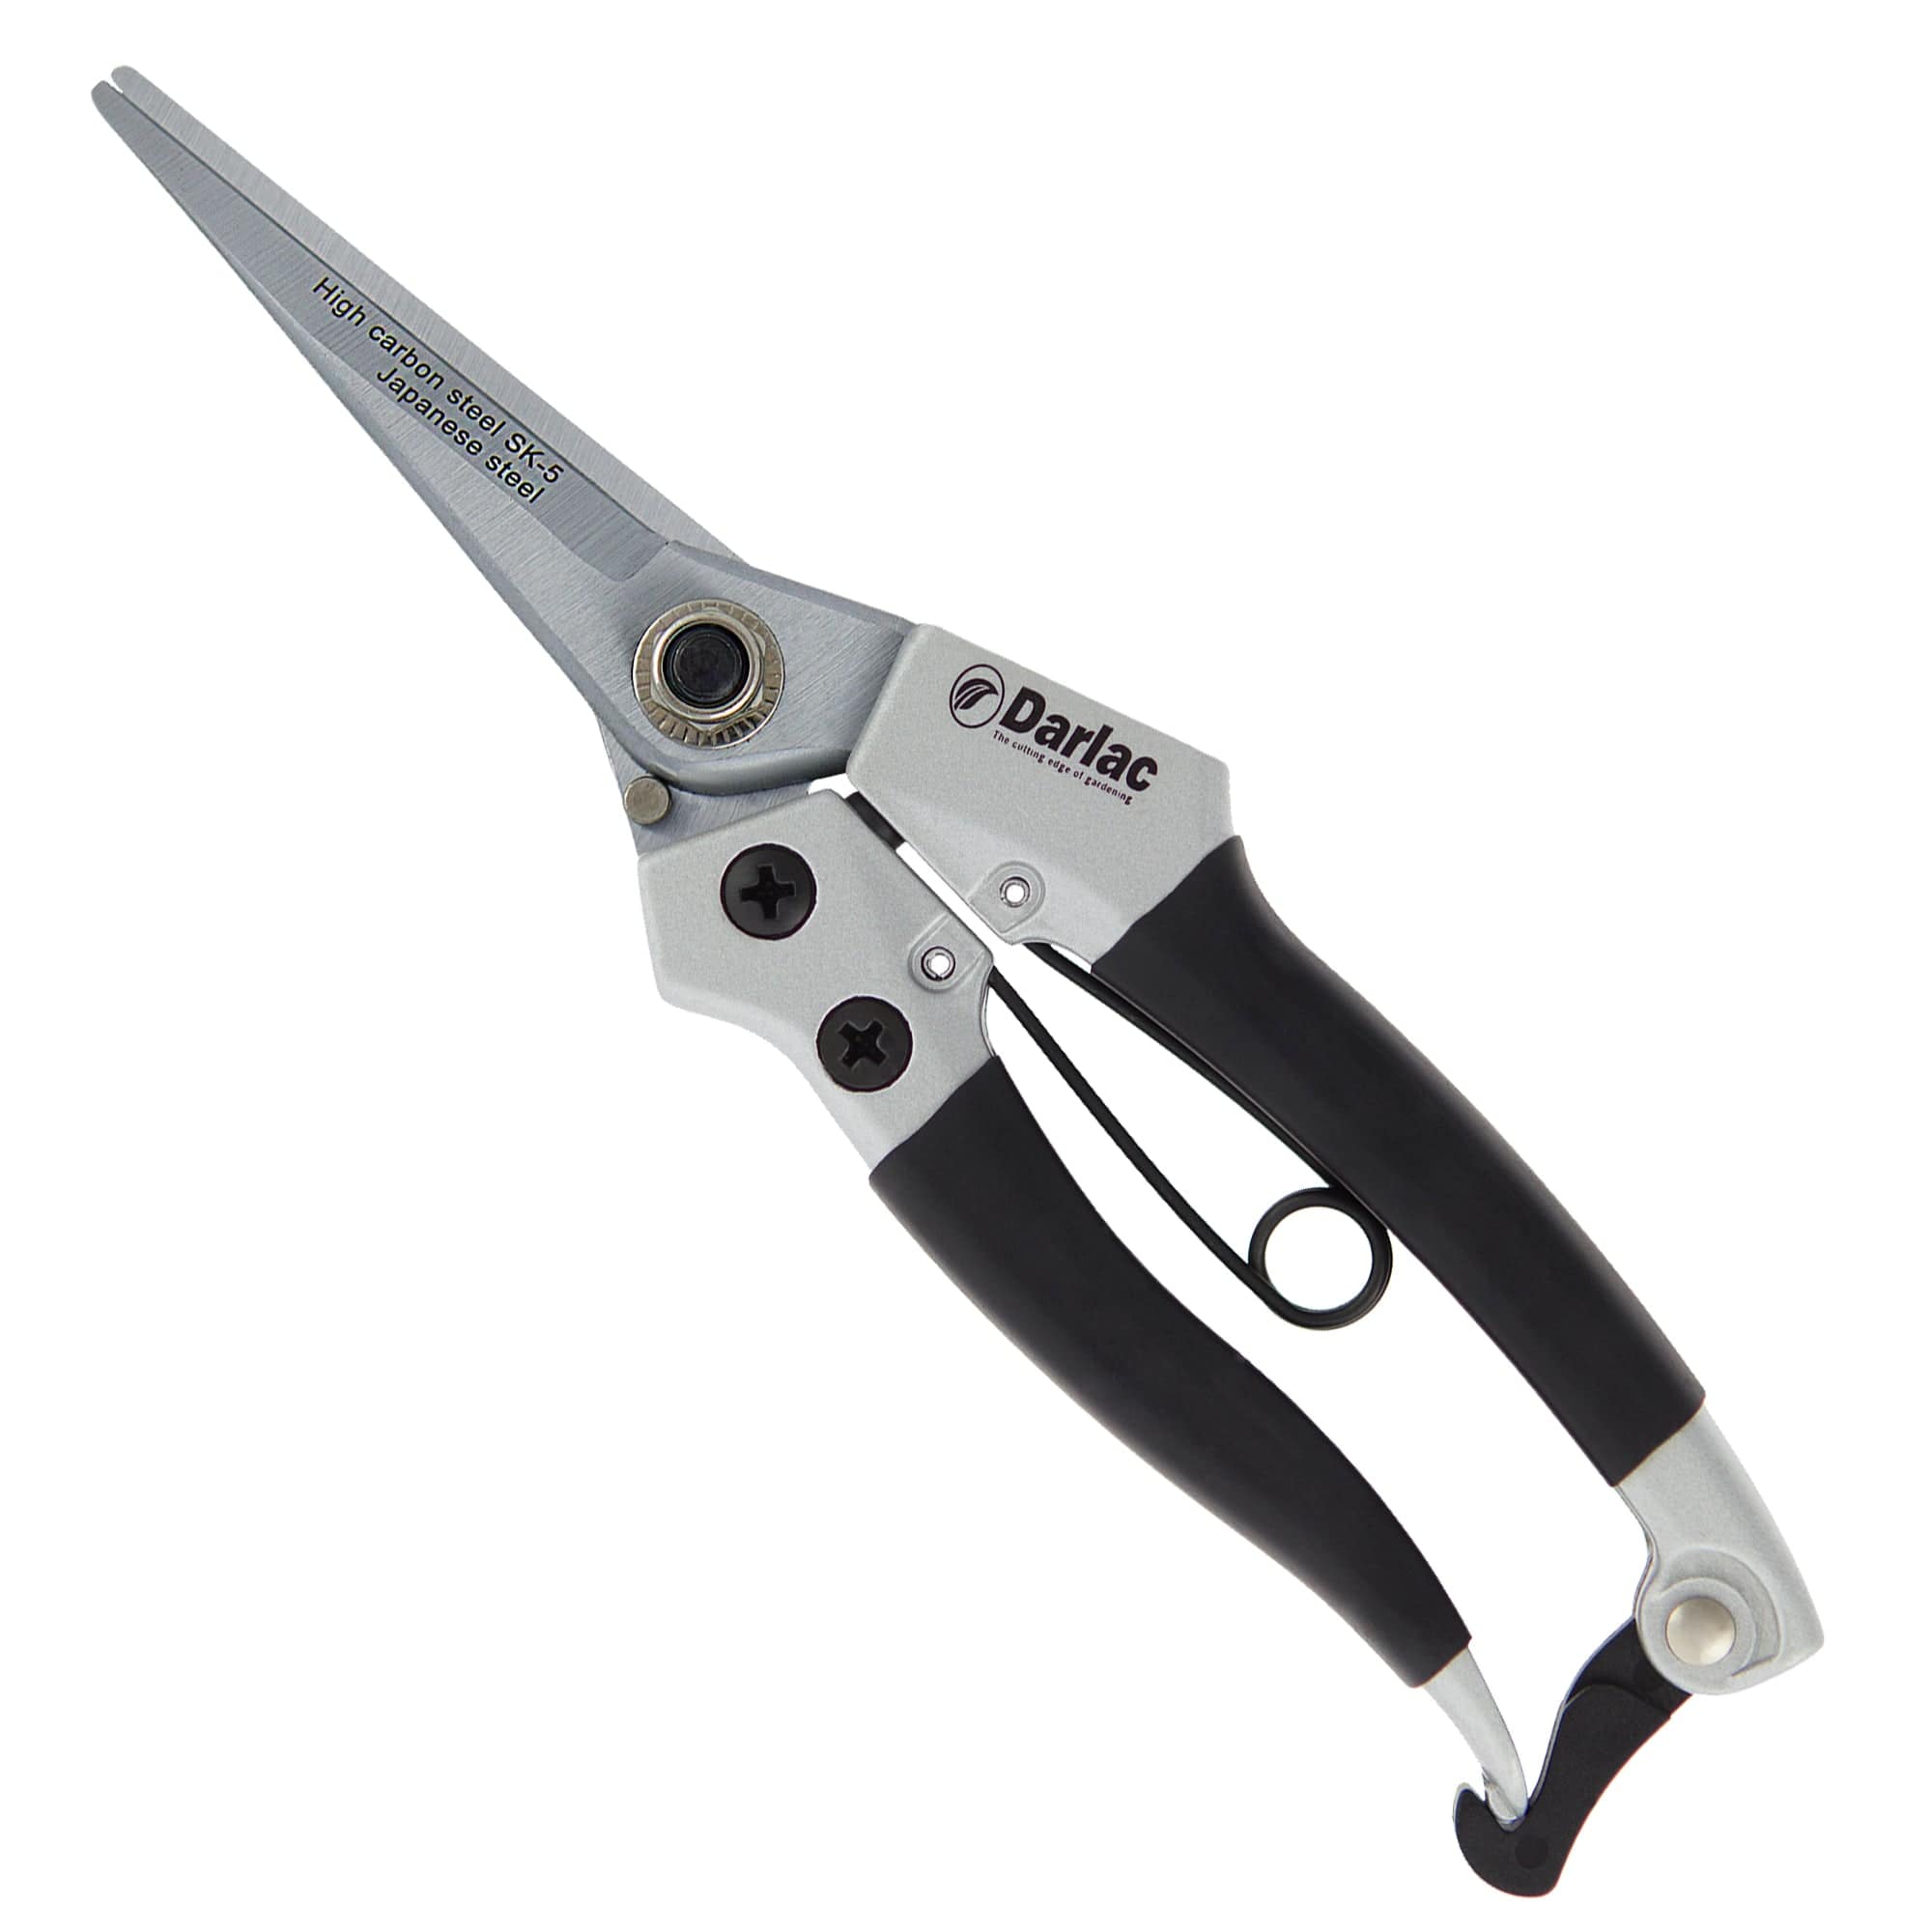 dt-brown HARDWARE Darlac Compact Snips